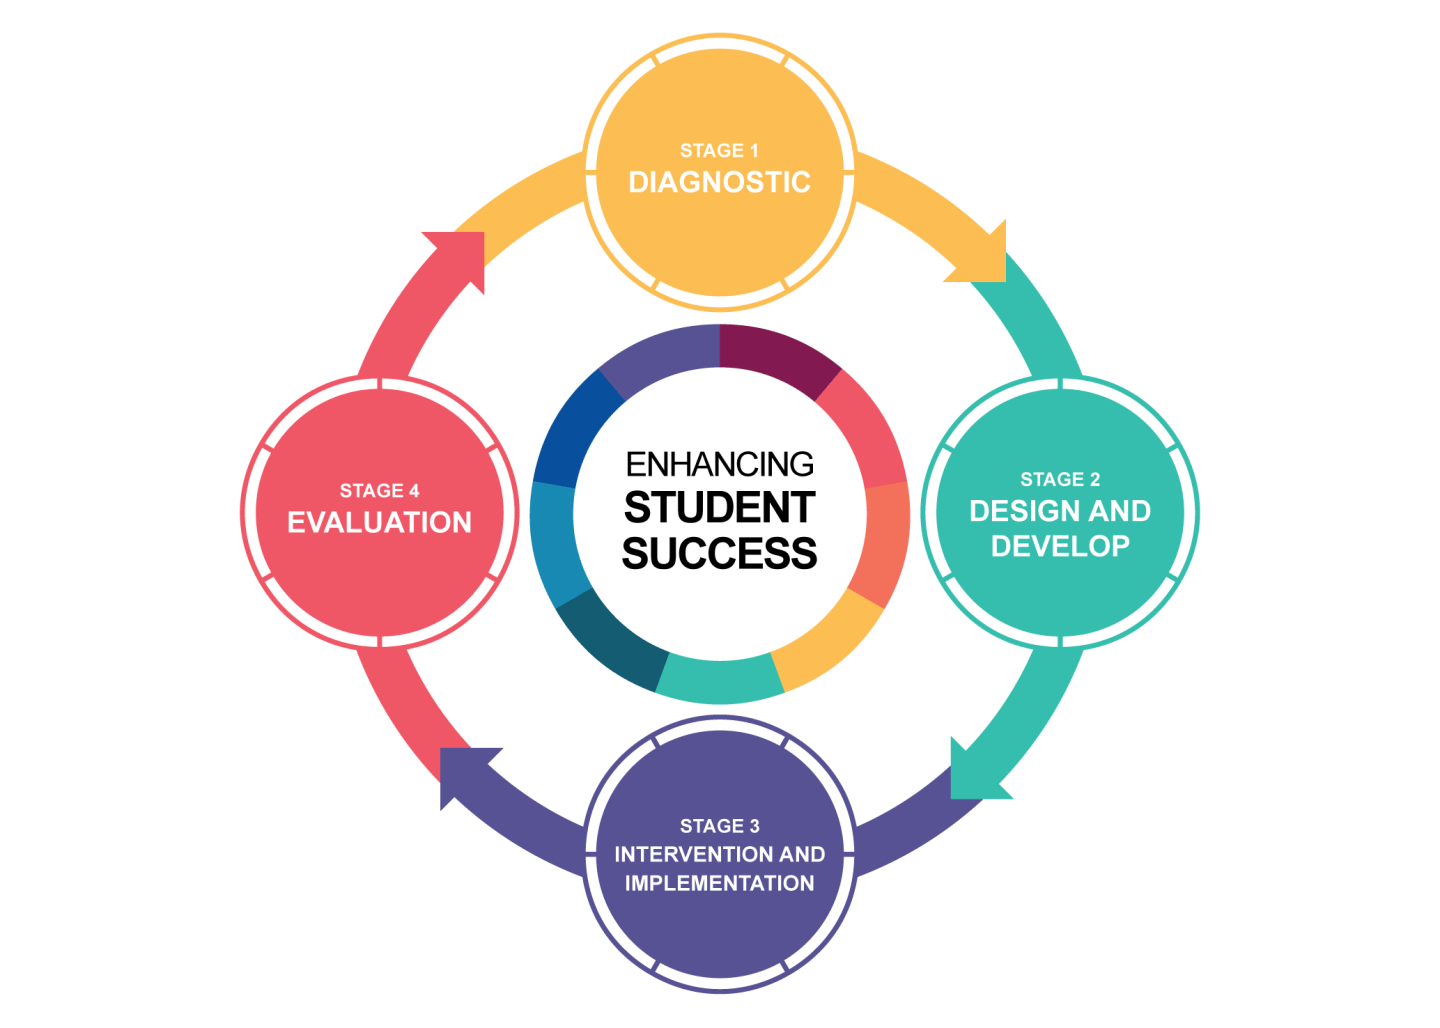 Advance HE approach to enhancing student success